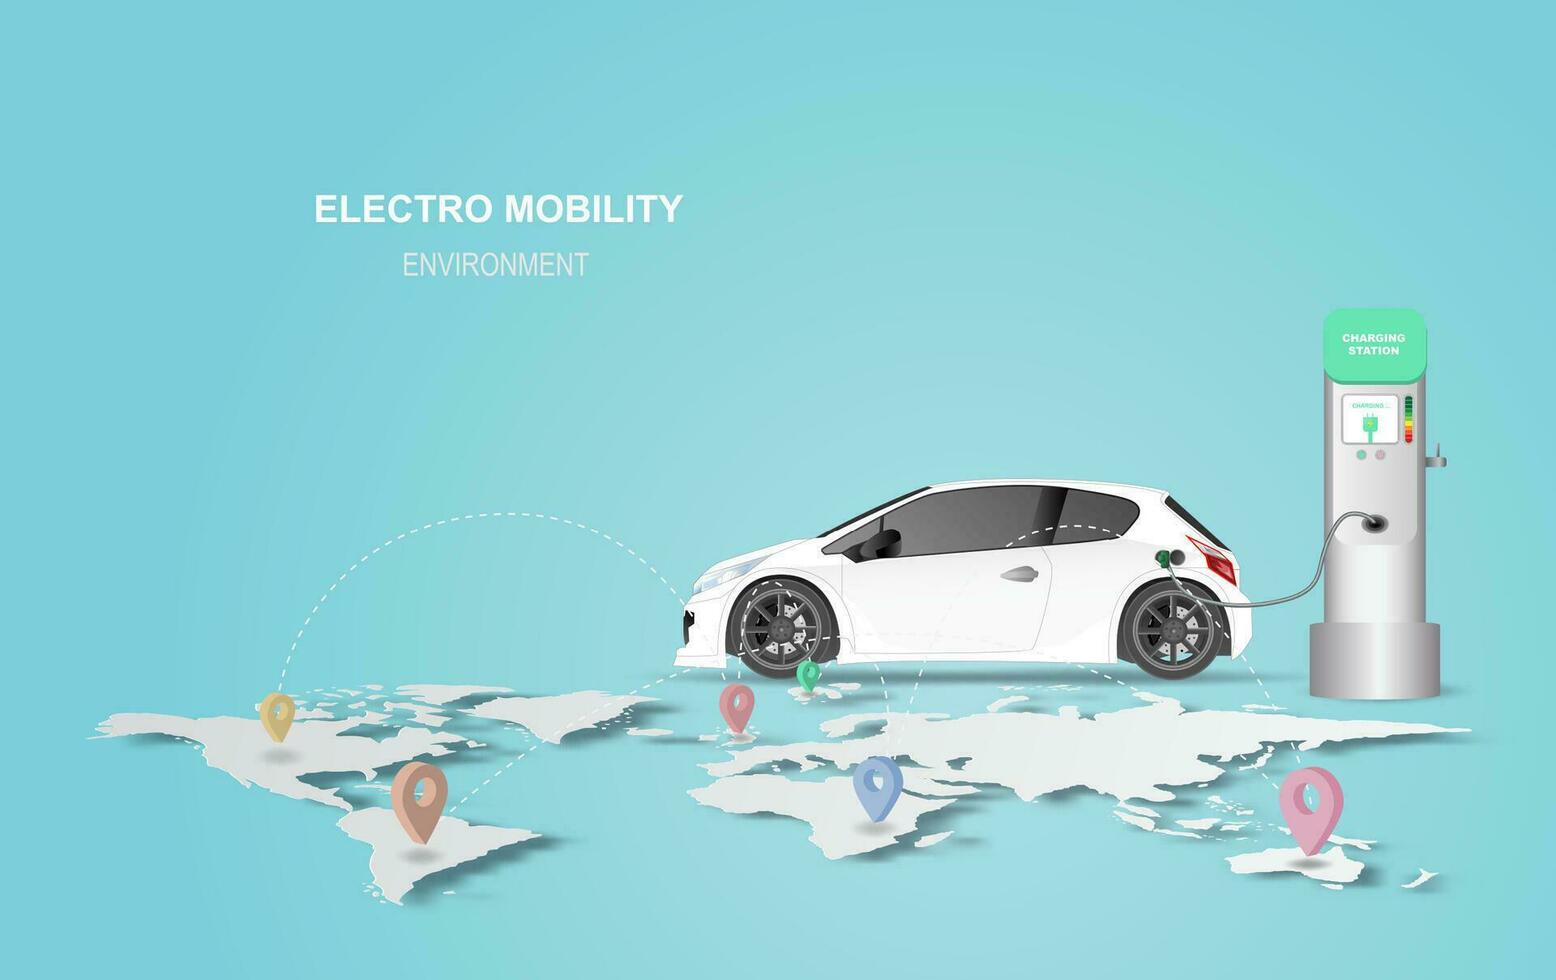 illustration banner with electric car charging station. Electro mobility environment for map location network concept.Green Clean energy transport.Creative paper art and craft style vector EPS10